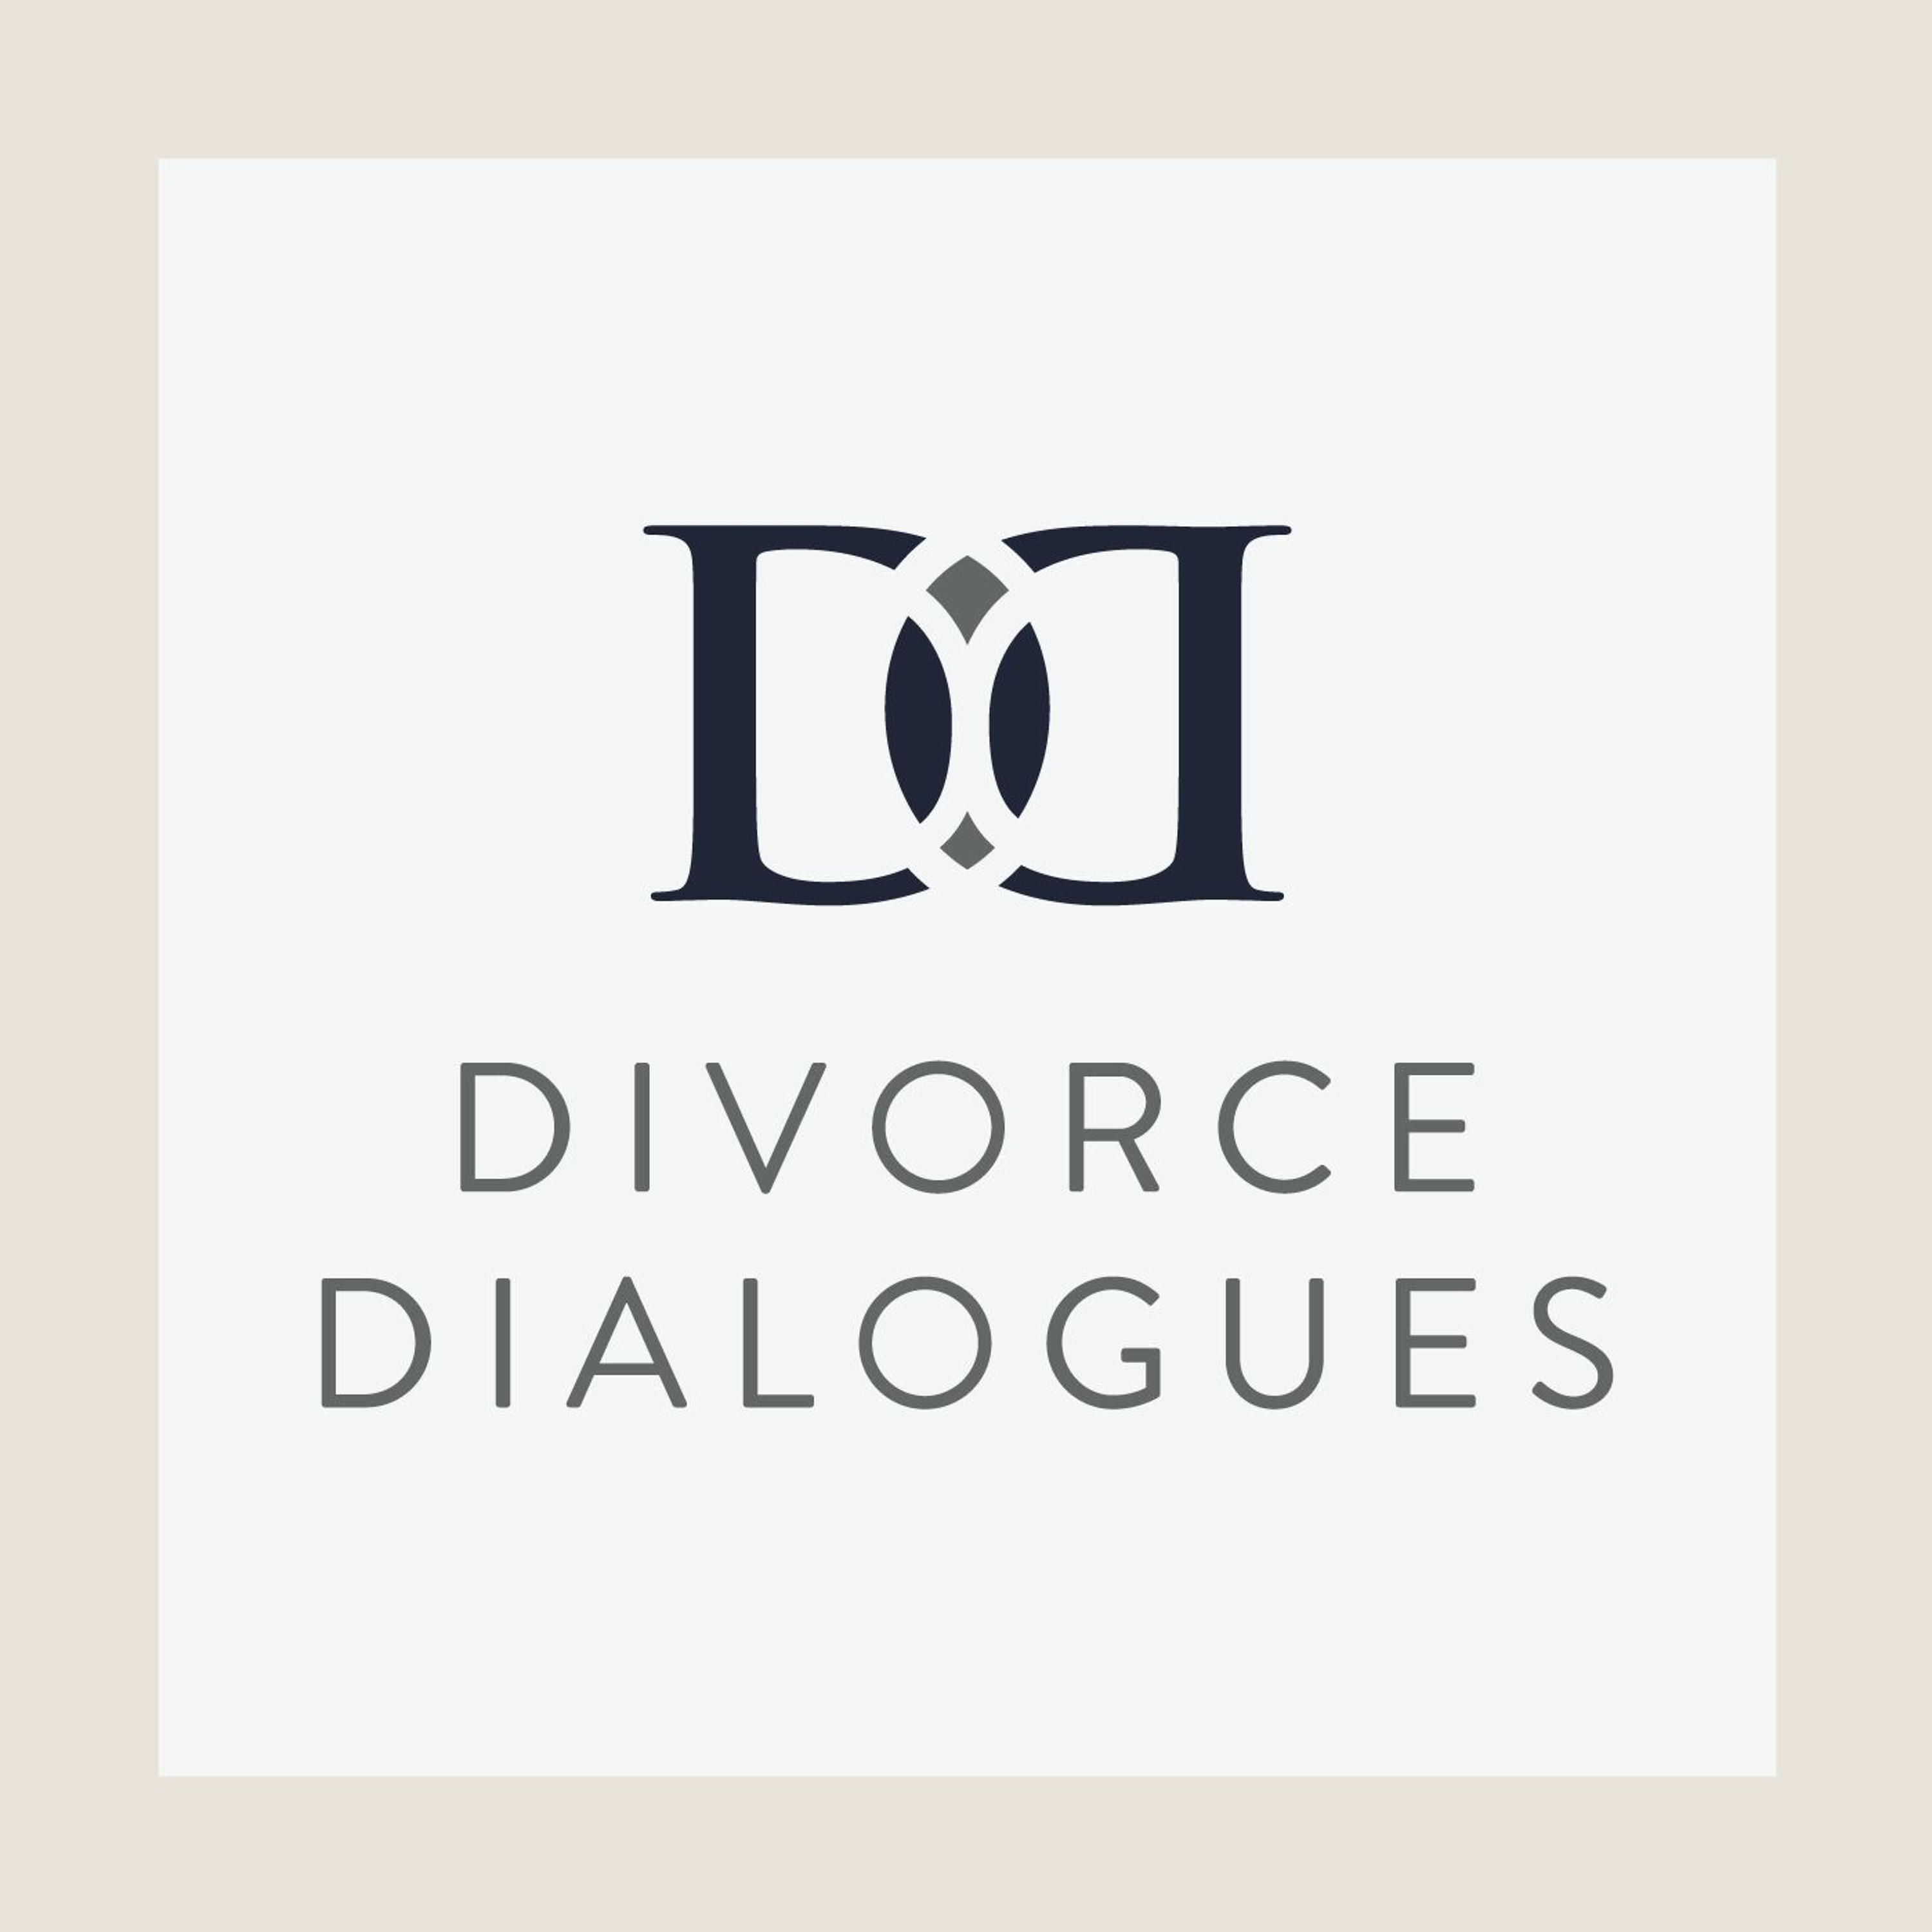 Divorce Dialogues - What You Need to Know About Family Building Via Surrogacy with Lisa Schuman